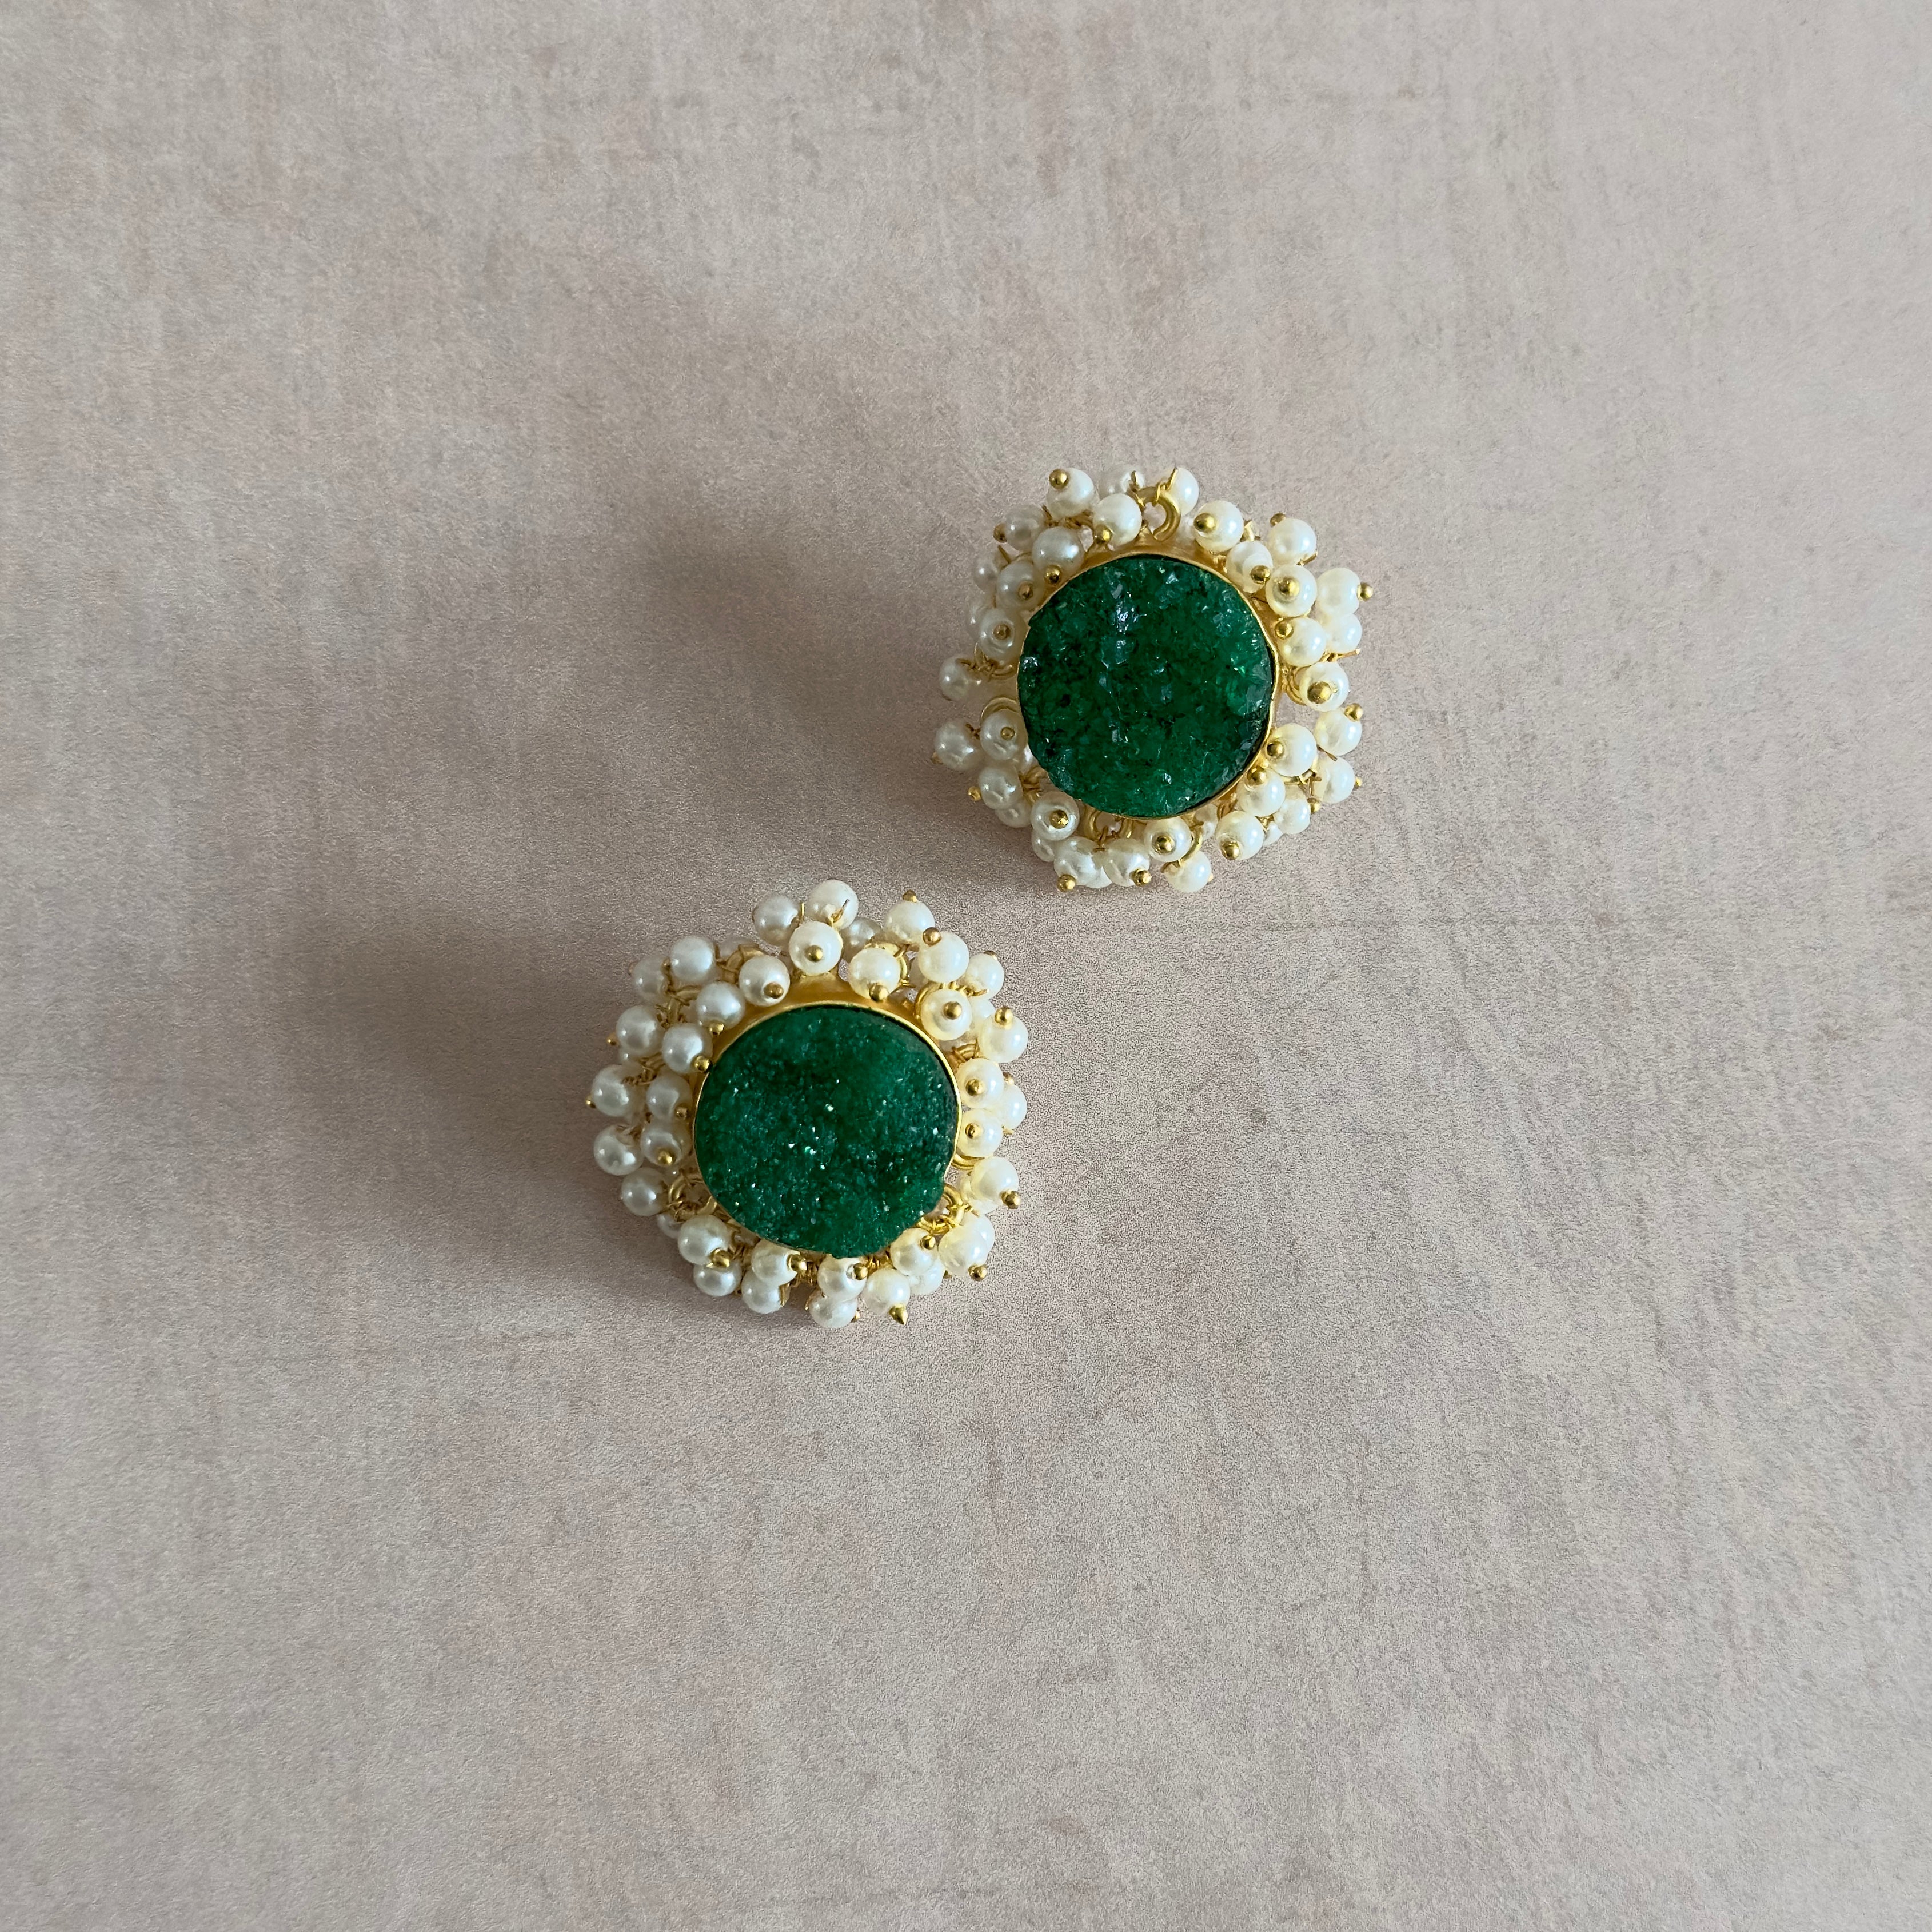 Add a touch of sparkle to your outfit with our Druzy Green Stud Earrings! These earrings feature a beautiful sugar druzy crystal, bringing a unique and eye-catching element to your look. Elevate your style and bring some extra shine to your day with these stunning earrings.